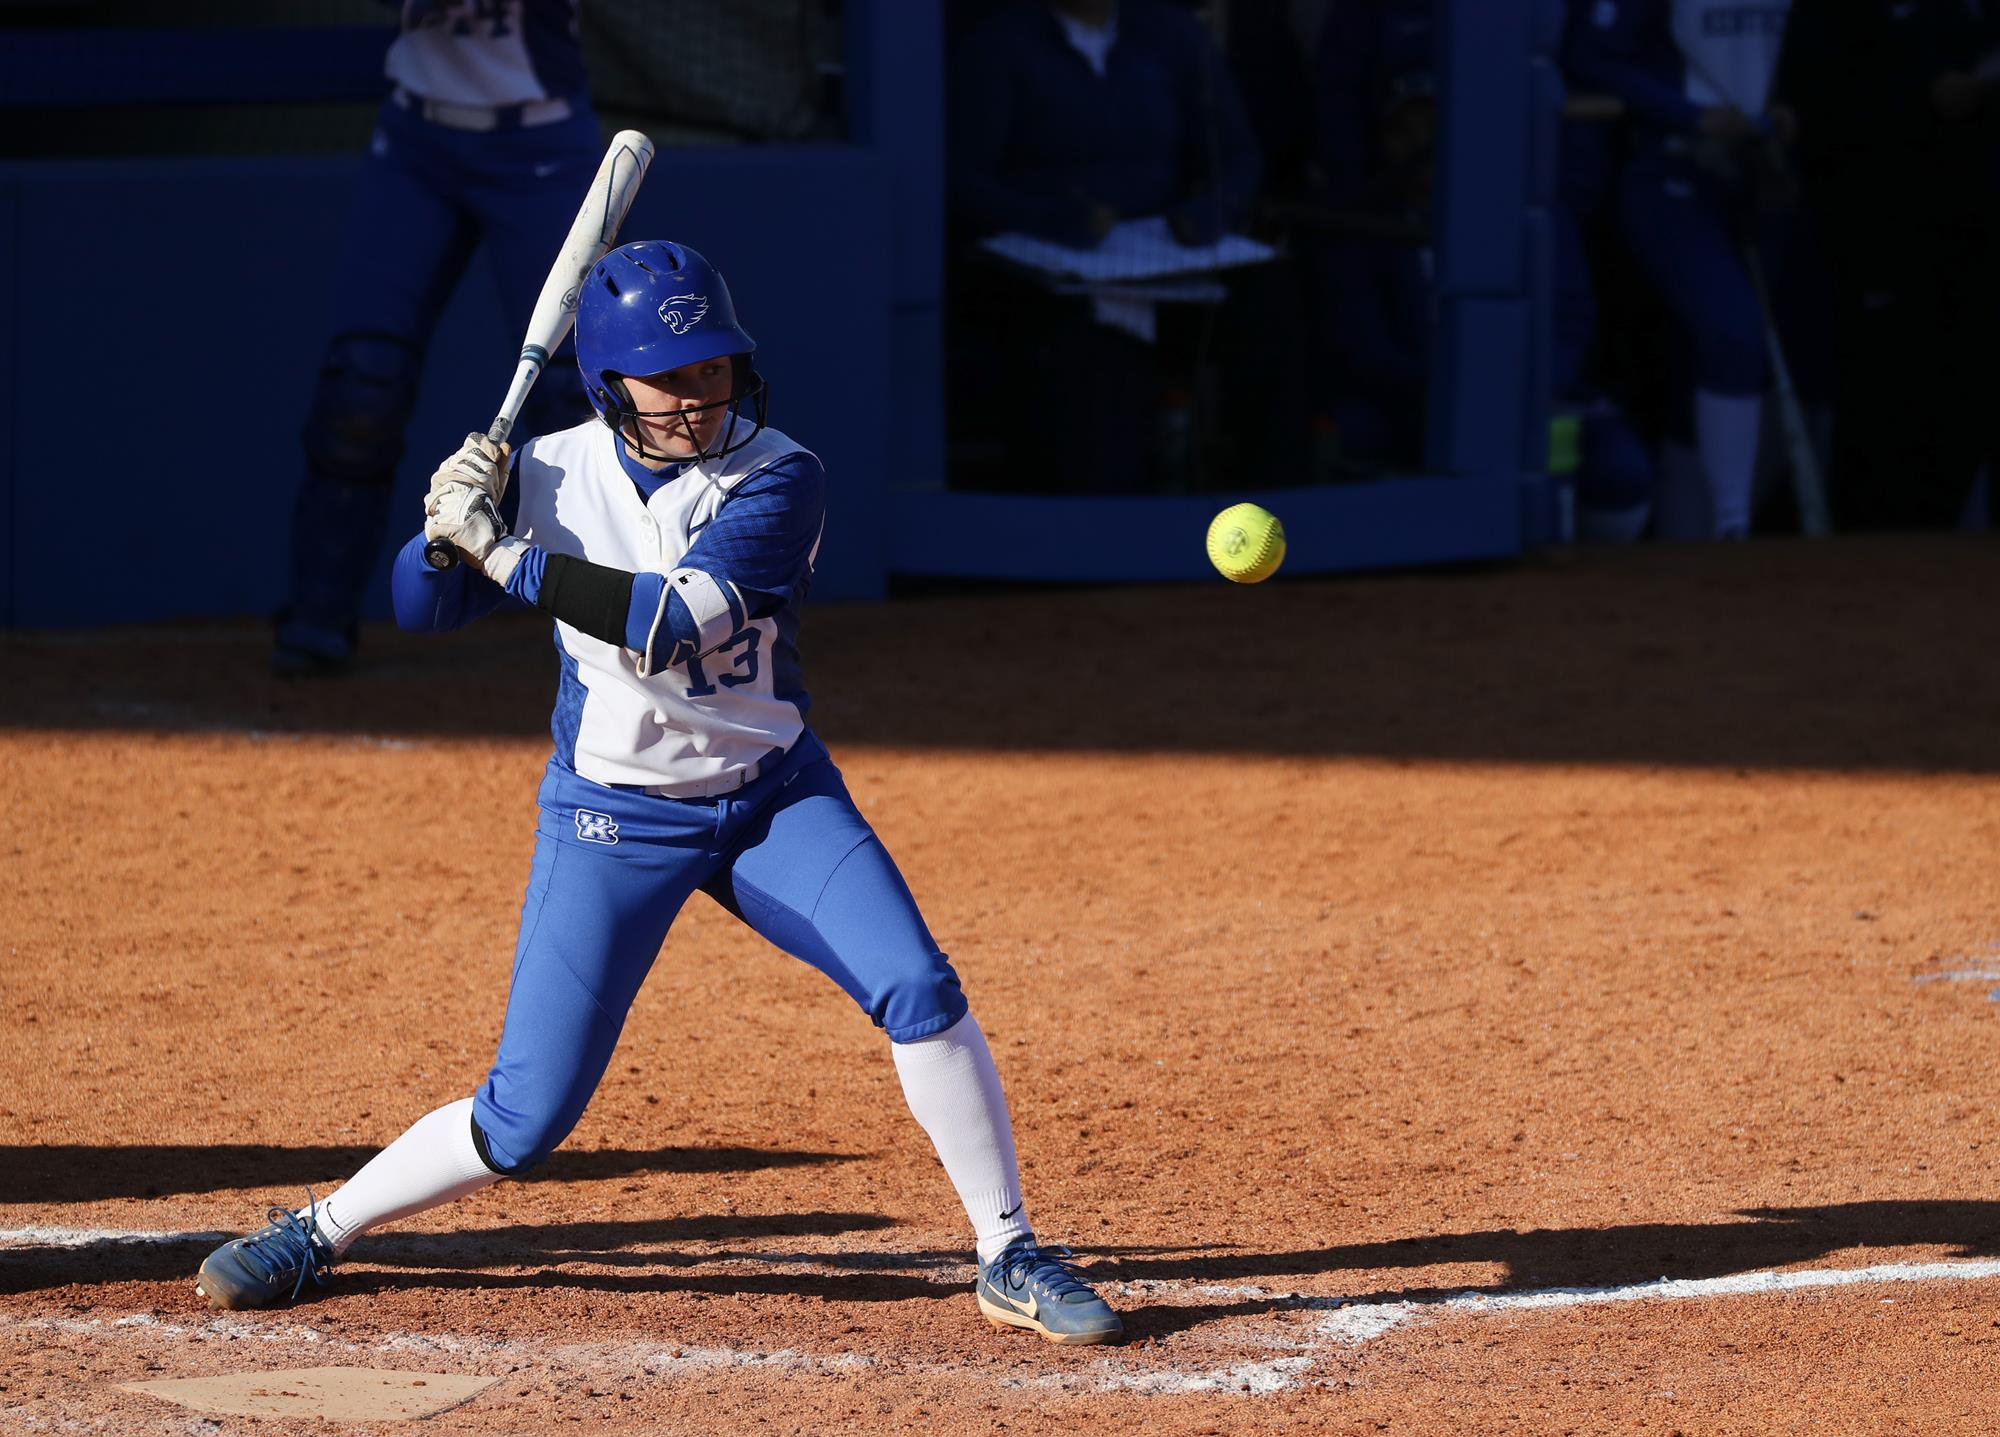 Peyton’s RBI, Rethlake’s Complete Game Gives UK Rivalry Win